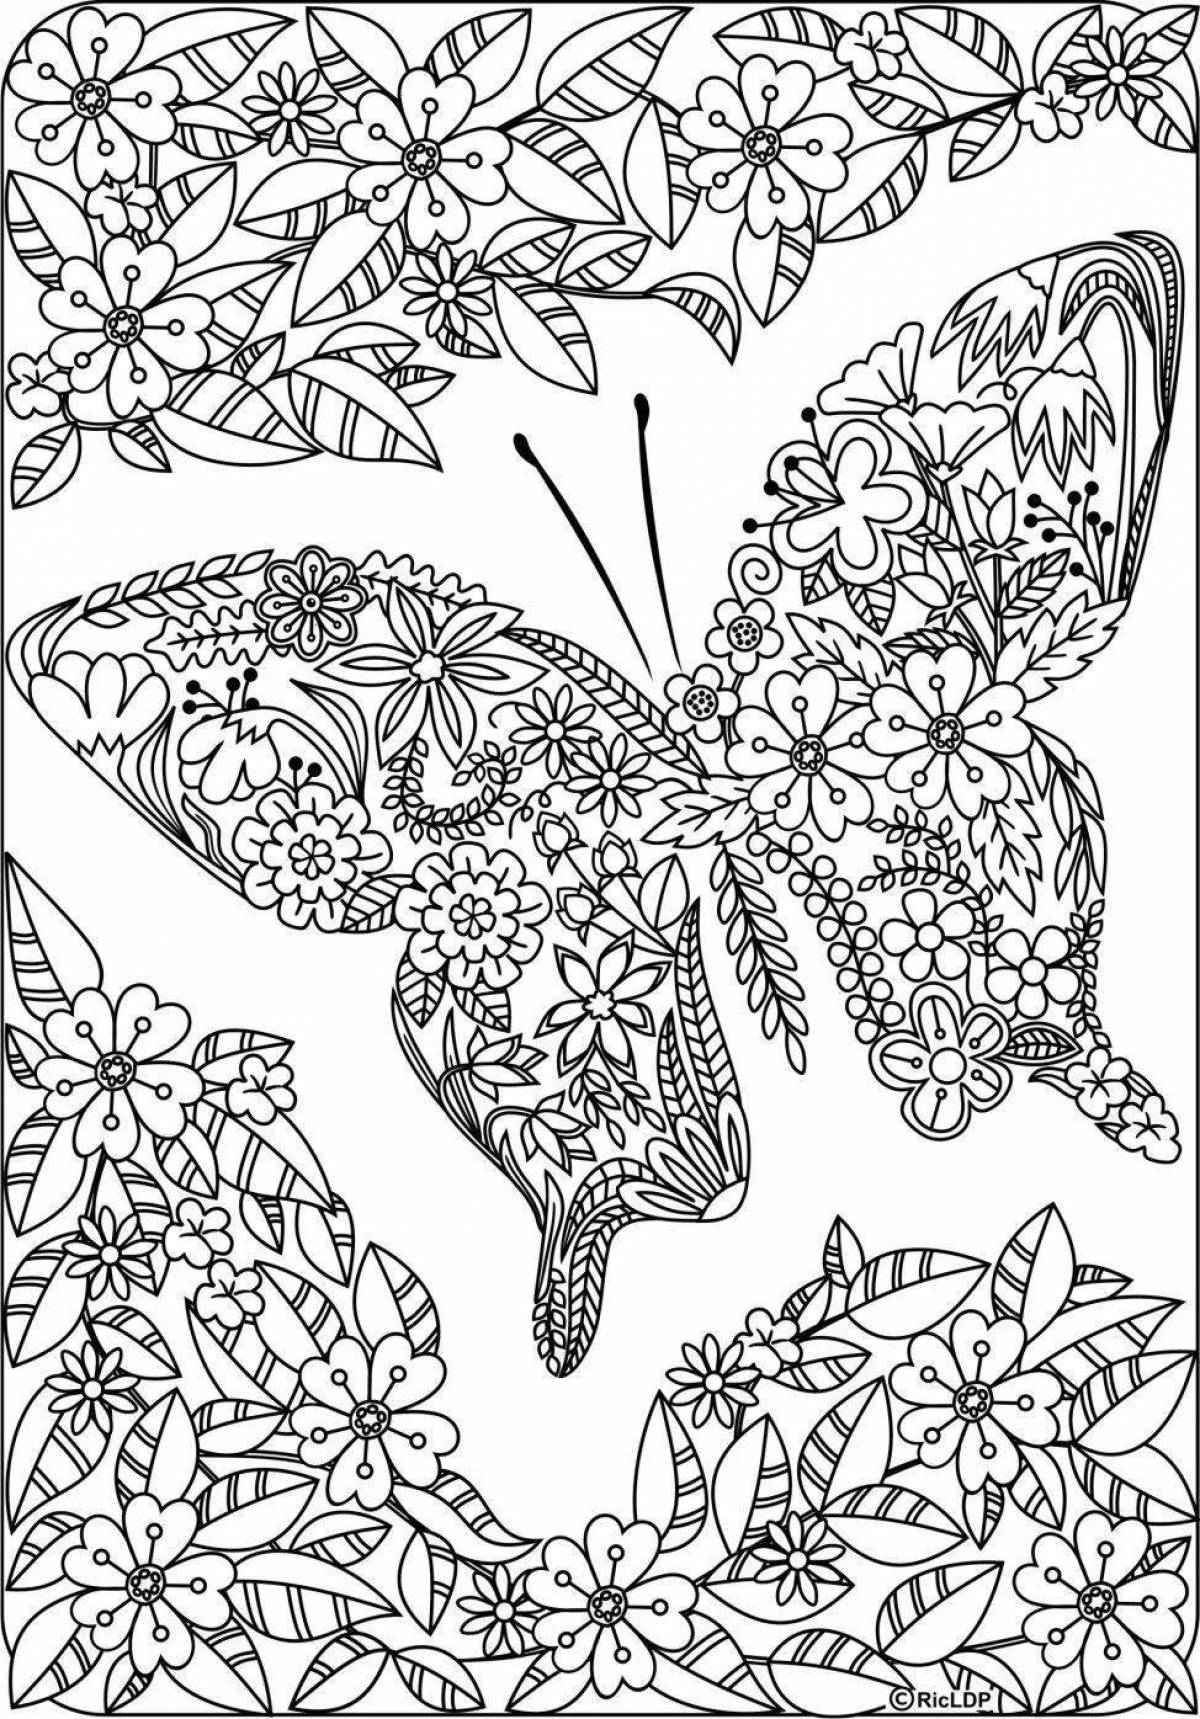 Invigorating coloring book relaxation antistress for adults